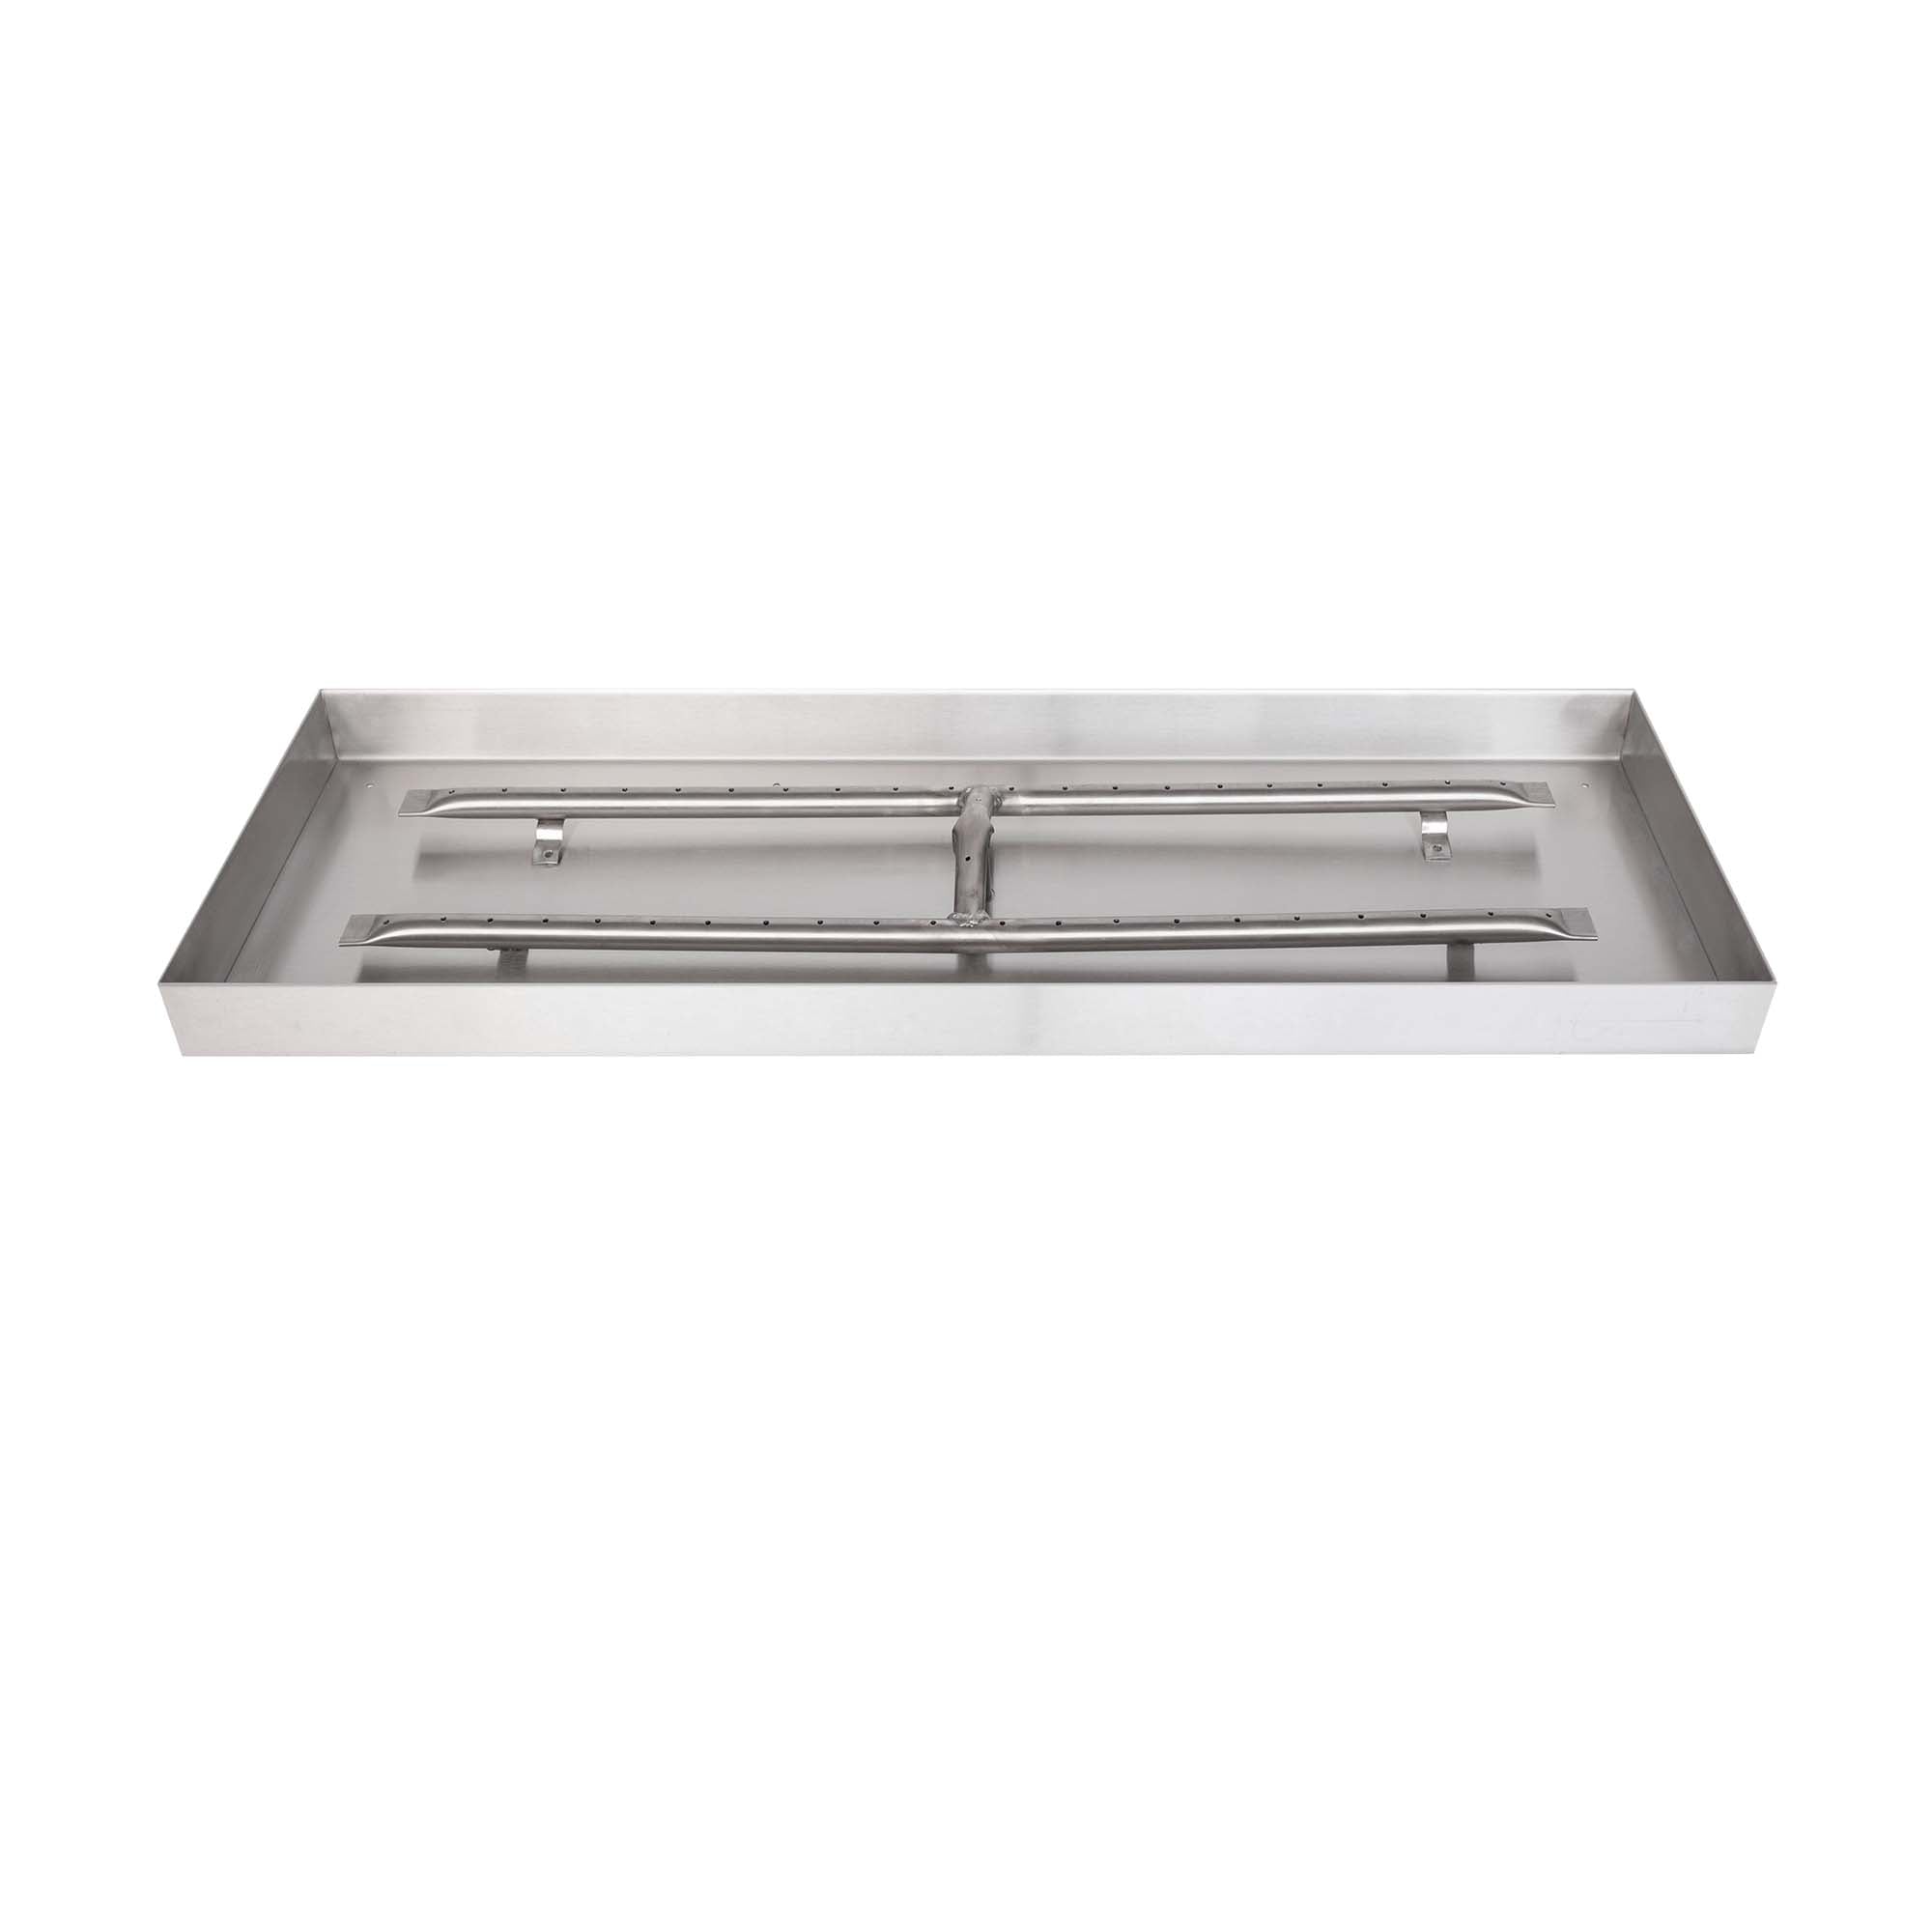 The Outdoor Plus Rectangular Lipless Drop-in Pan with Stainless Steel H Burner